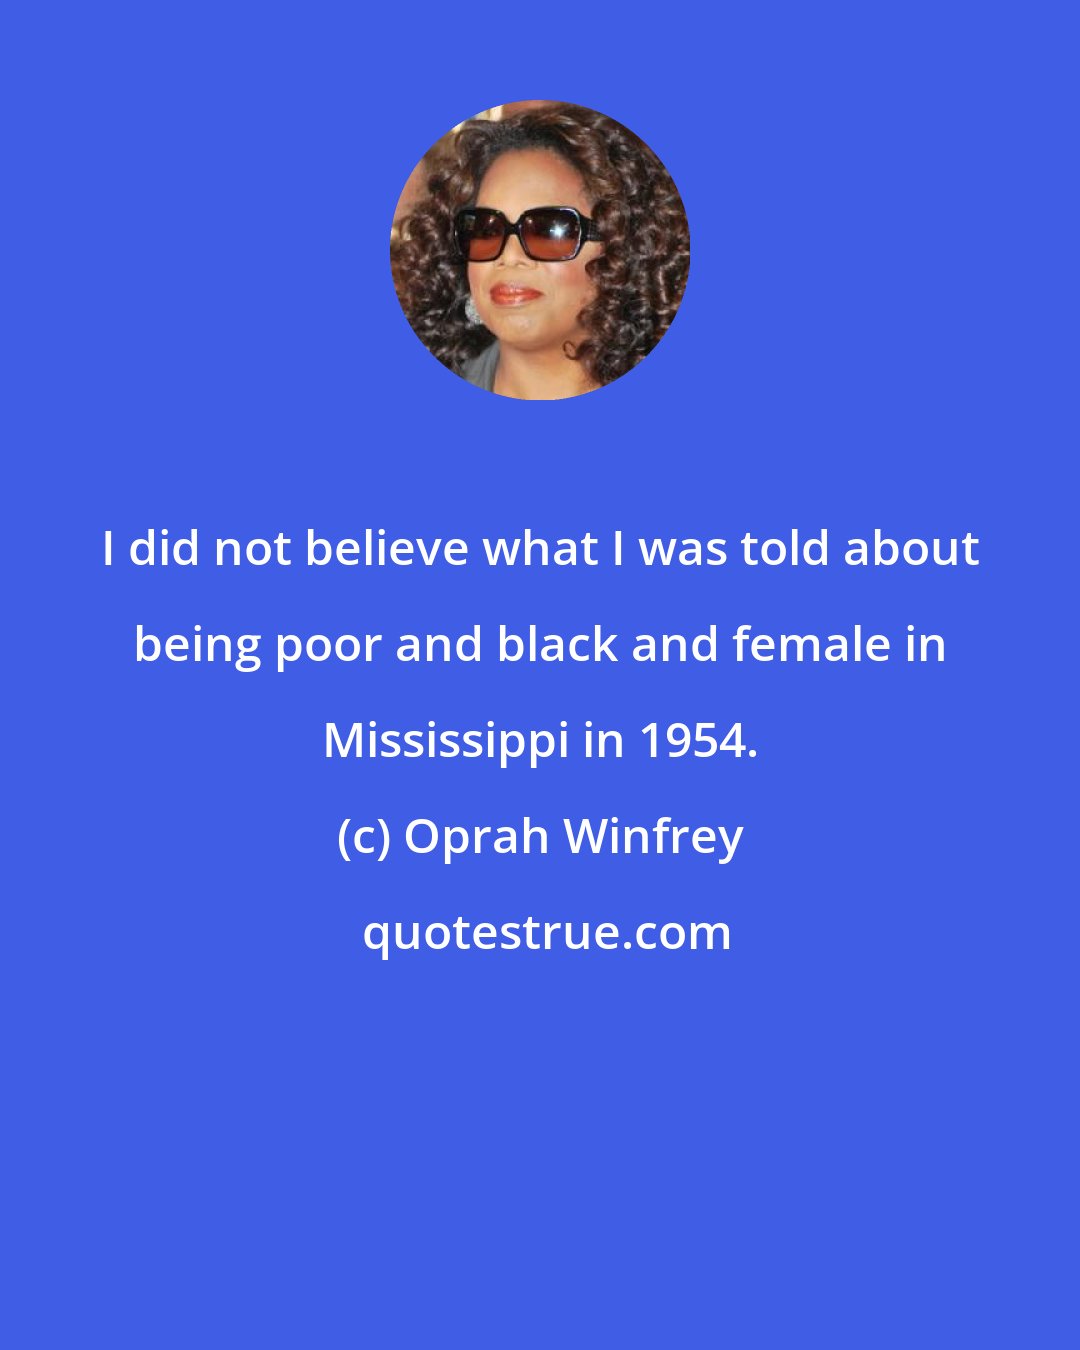 Oprah Winfrey: I did not believe what I was told about being poor and black and female in Mississippi in 1954.